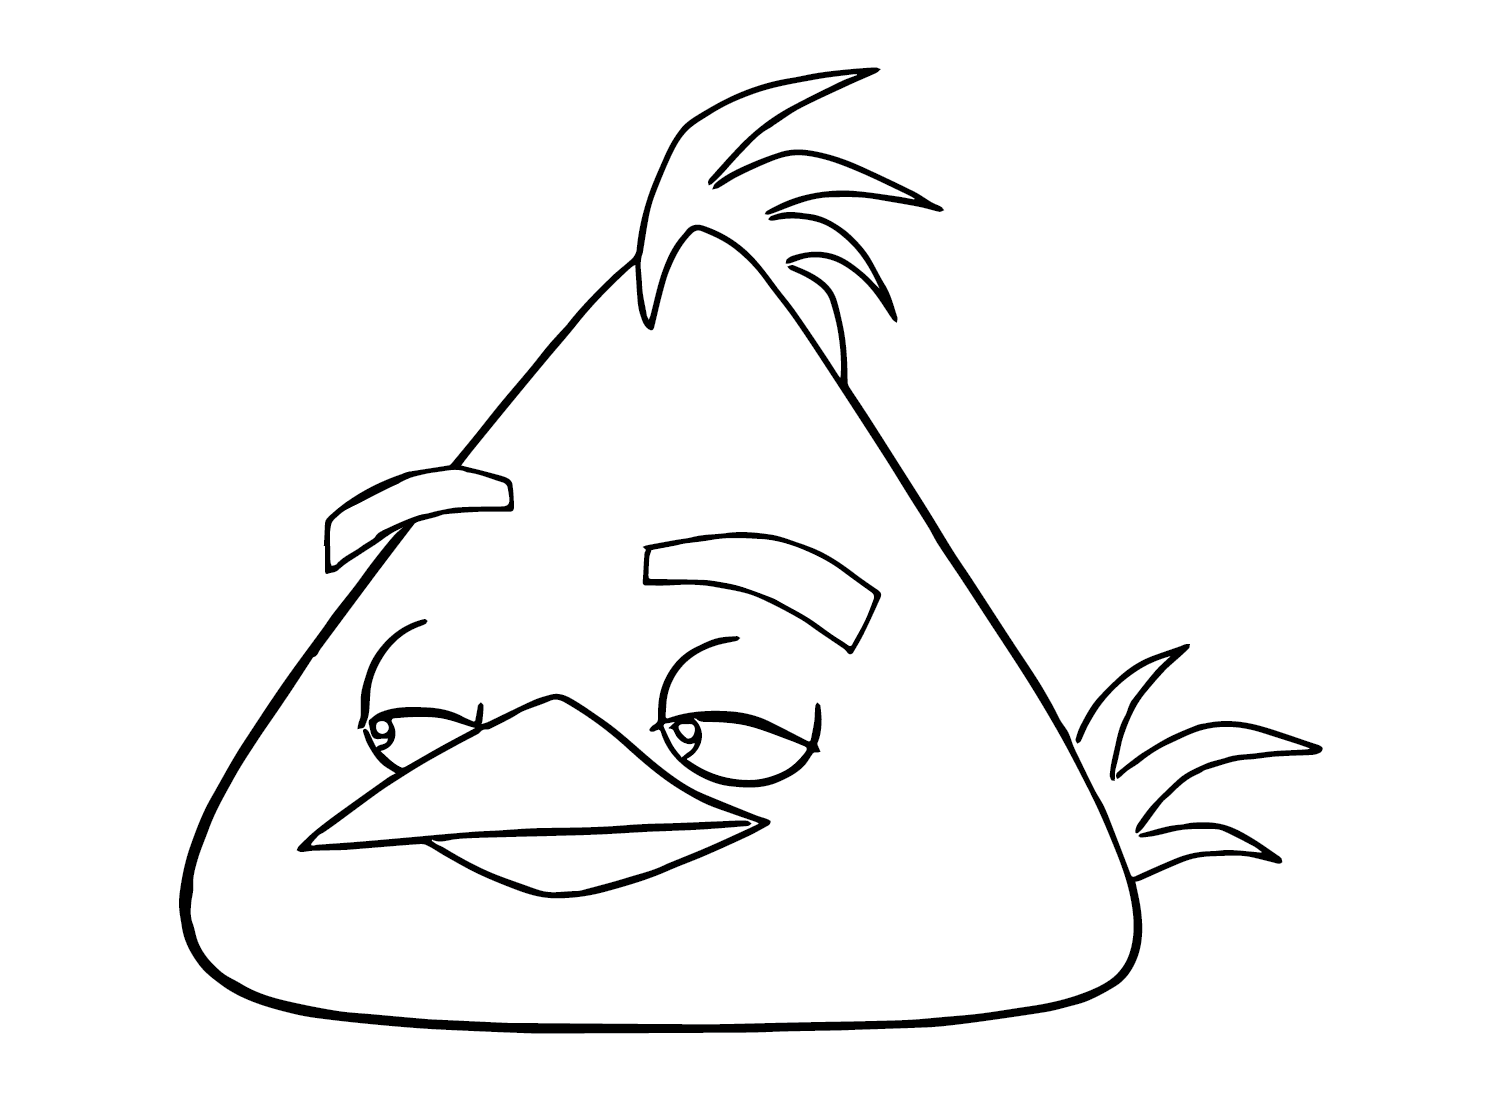 yellow angry bird coloring page